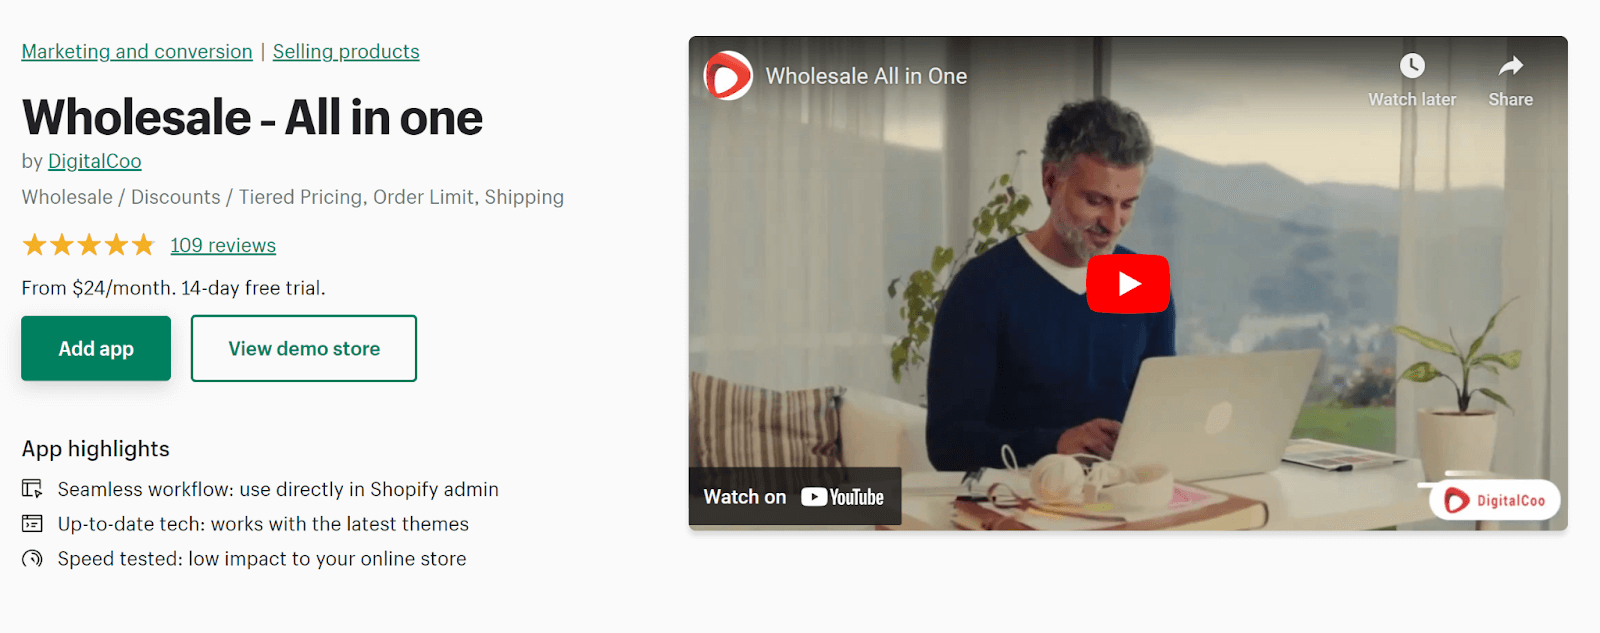 Wholesale - All in one